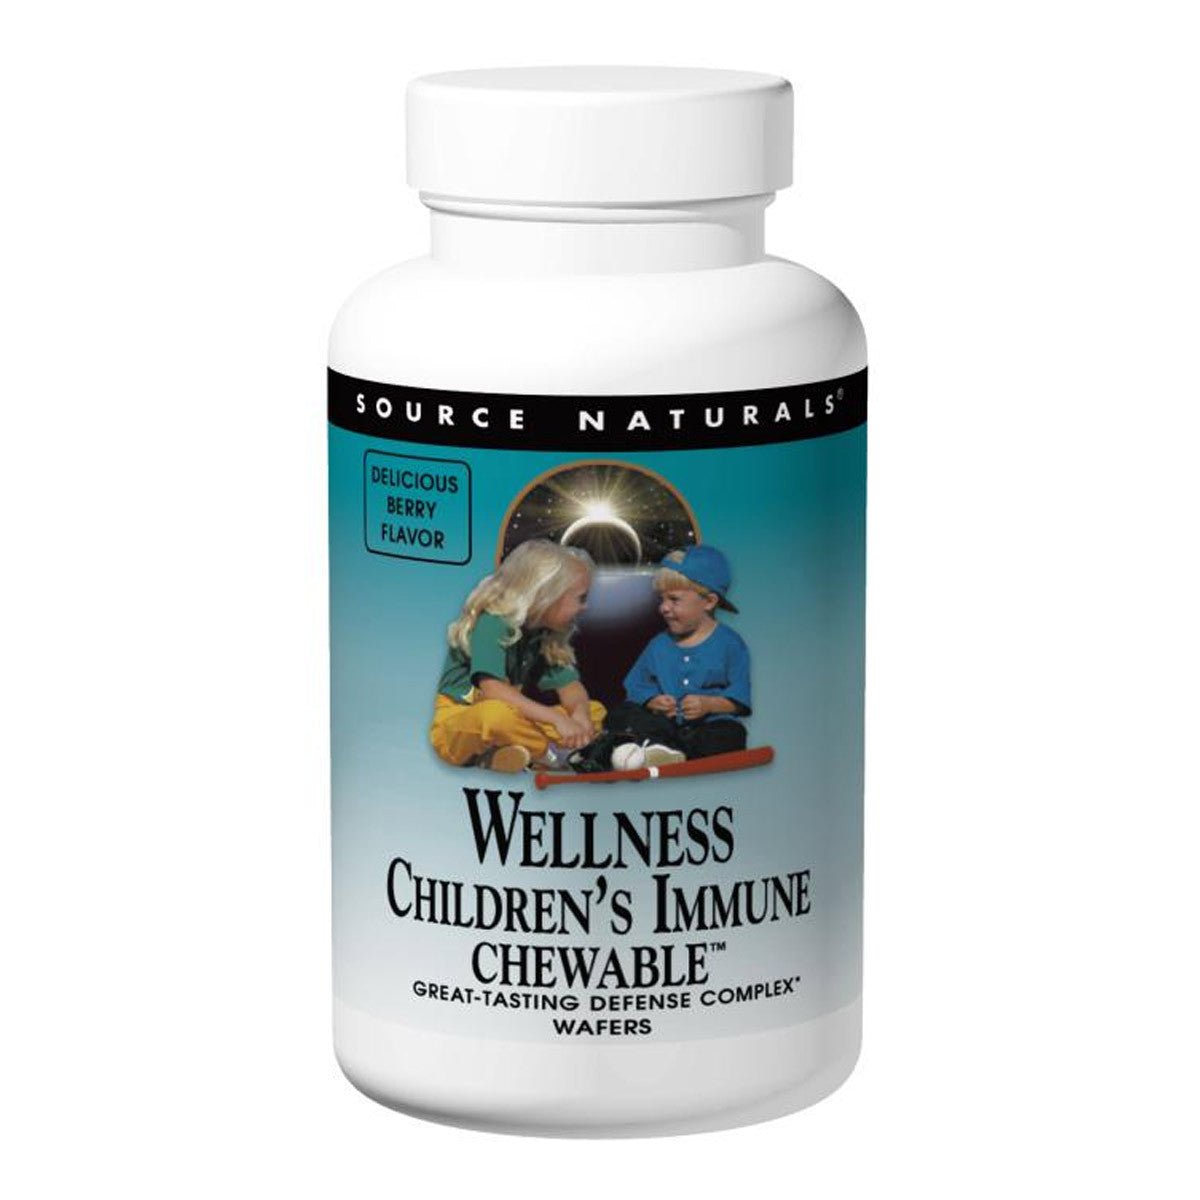 Primary image of Children's Immune Chewable Tablets